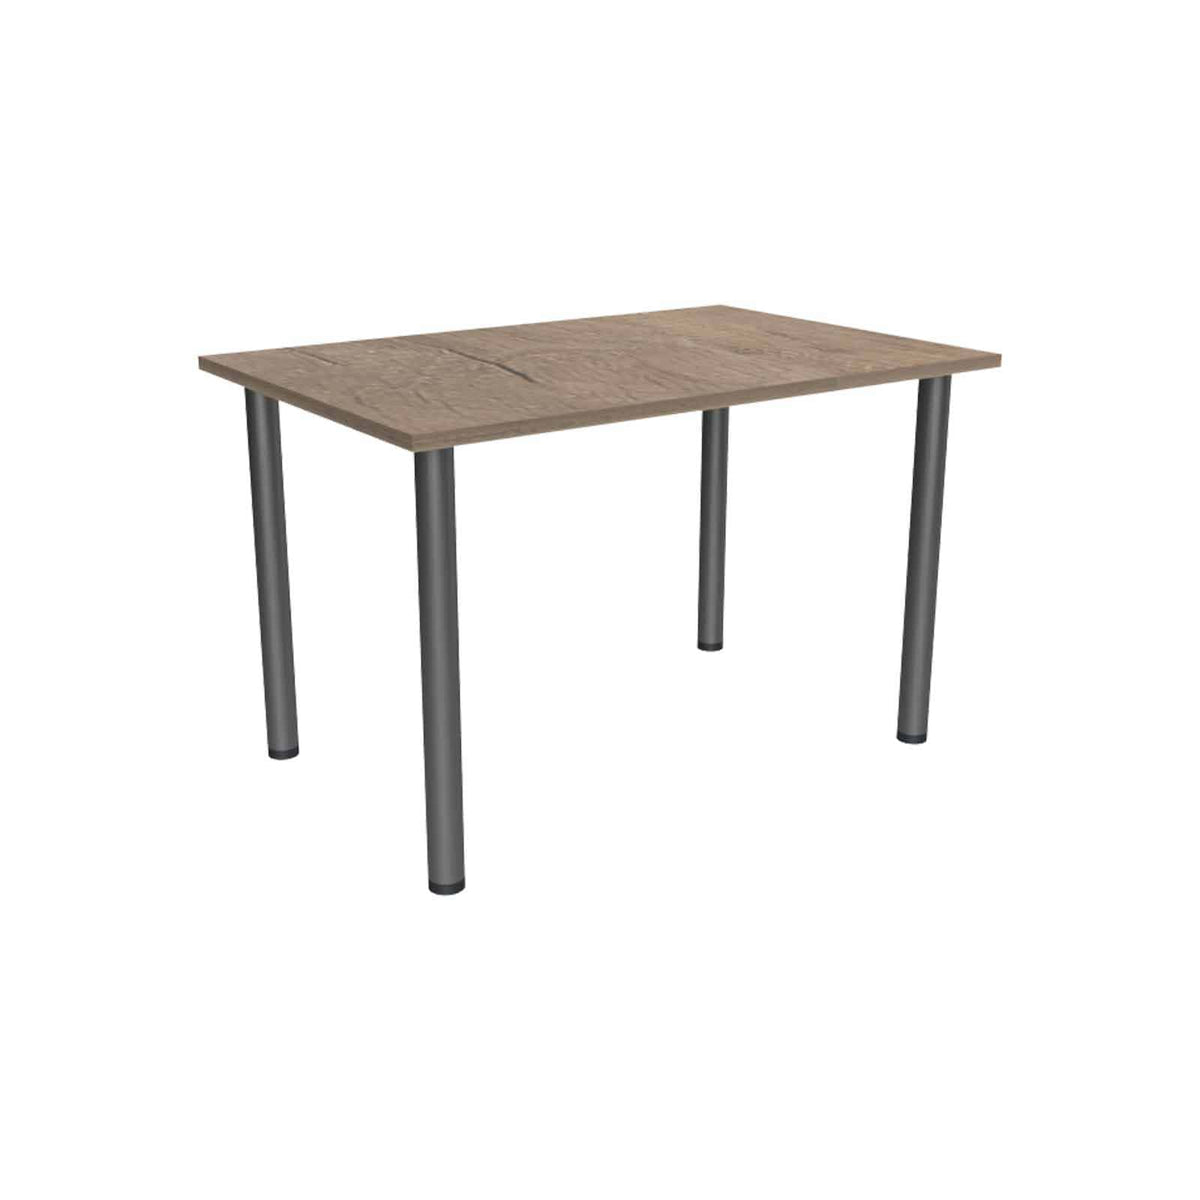 MADE TO ORDER Office Tables - Silver Tubular Legs W1200 x D800 x H740mm